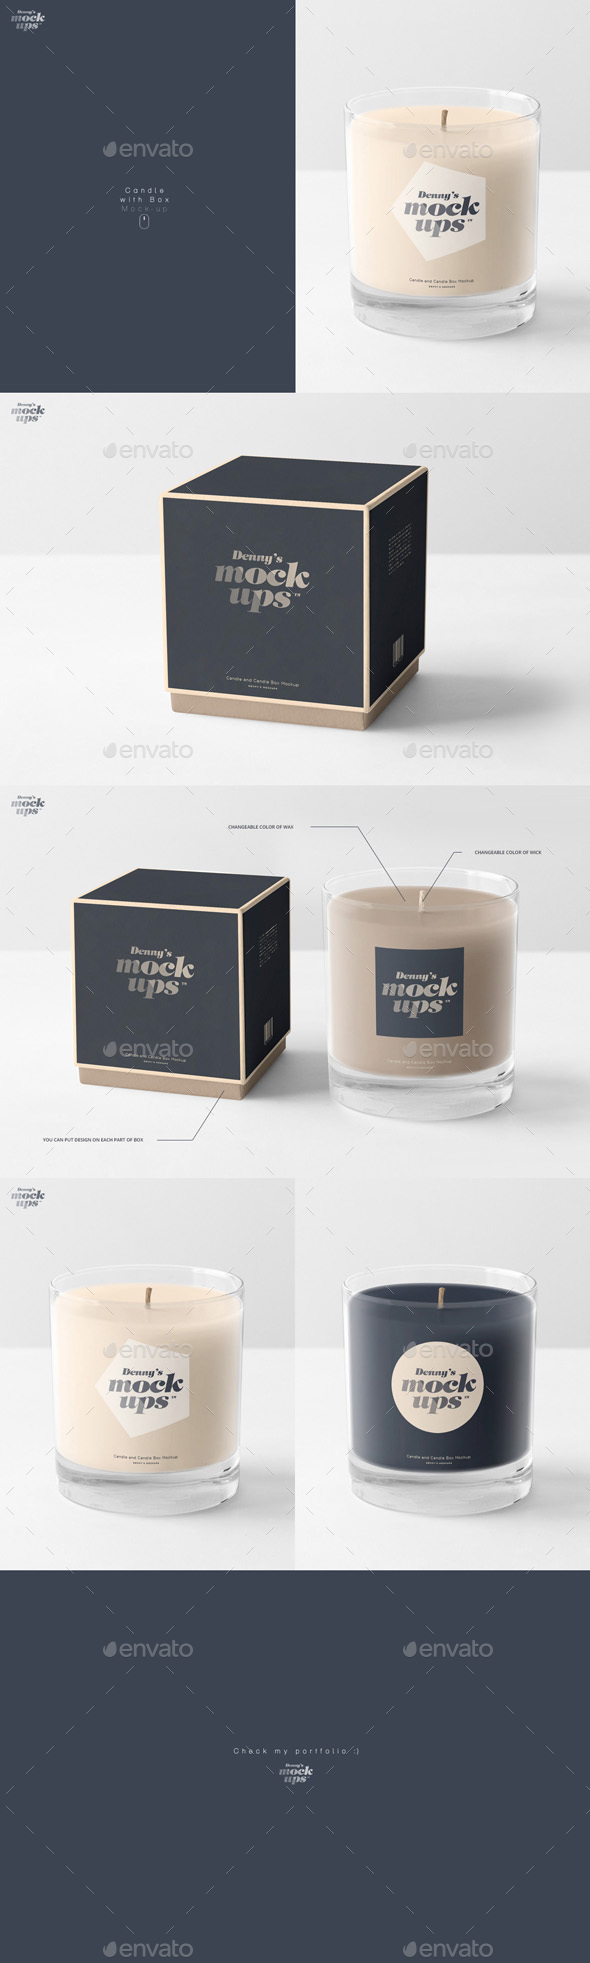 Download Candle Mockup Graphics Designs Templates From Graphicriver Yellowimages Mockups